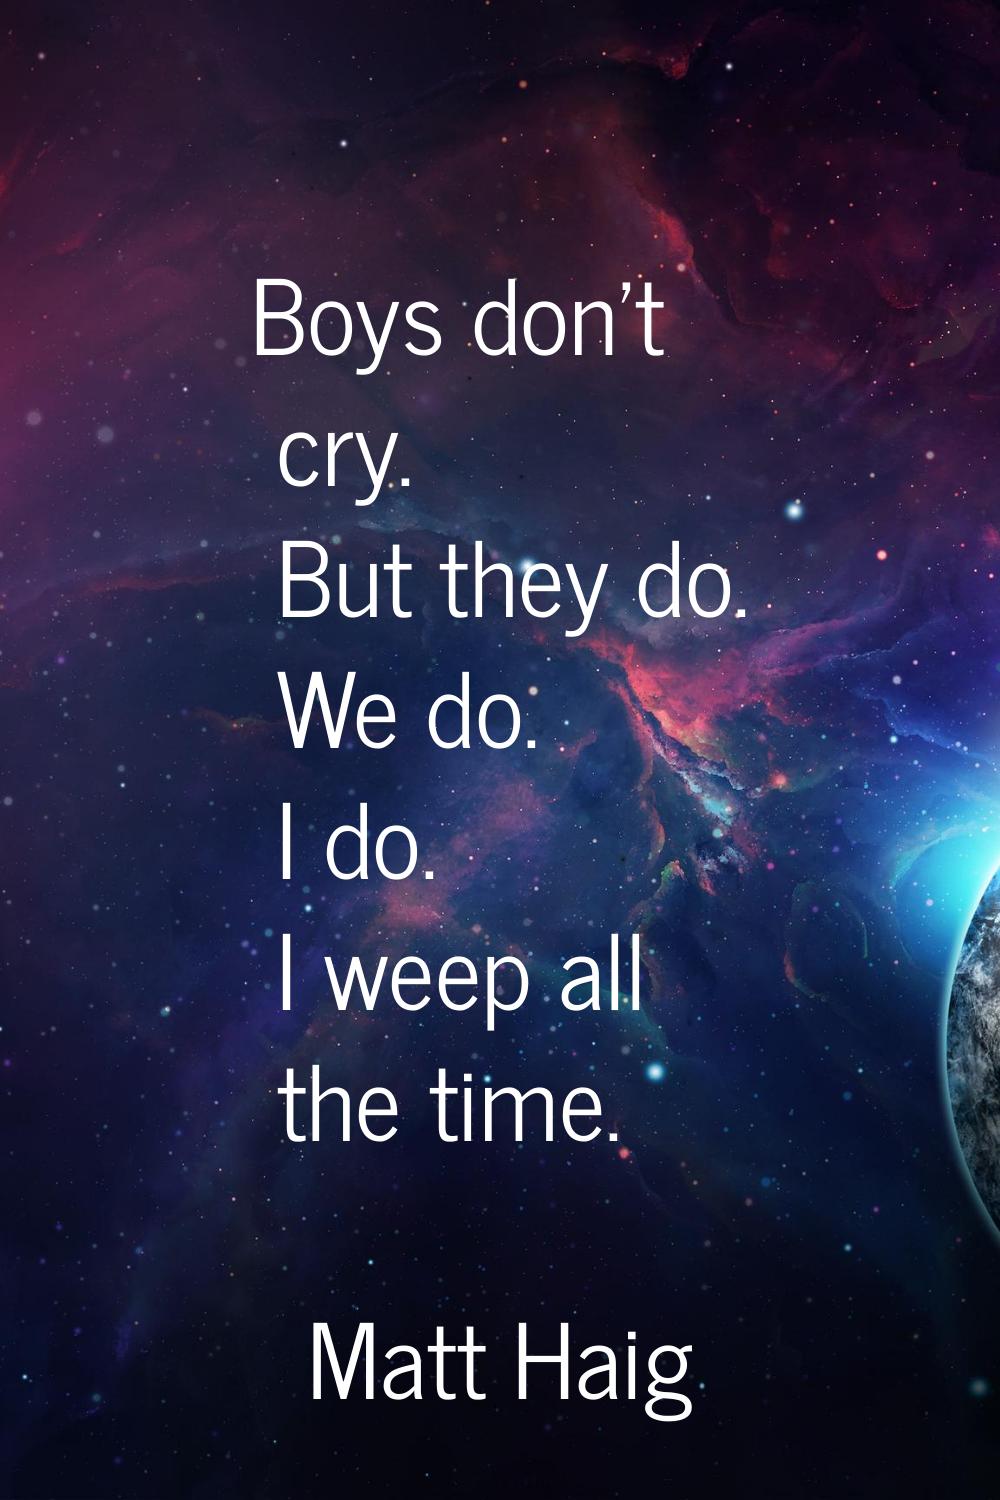 Boys don't cry. But they do. We do. I do. I weep all the time.